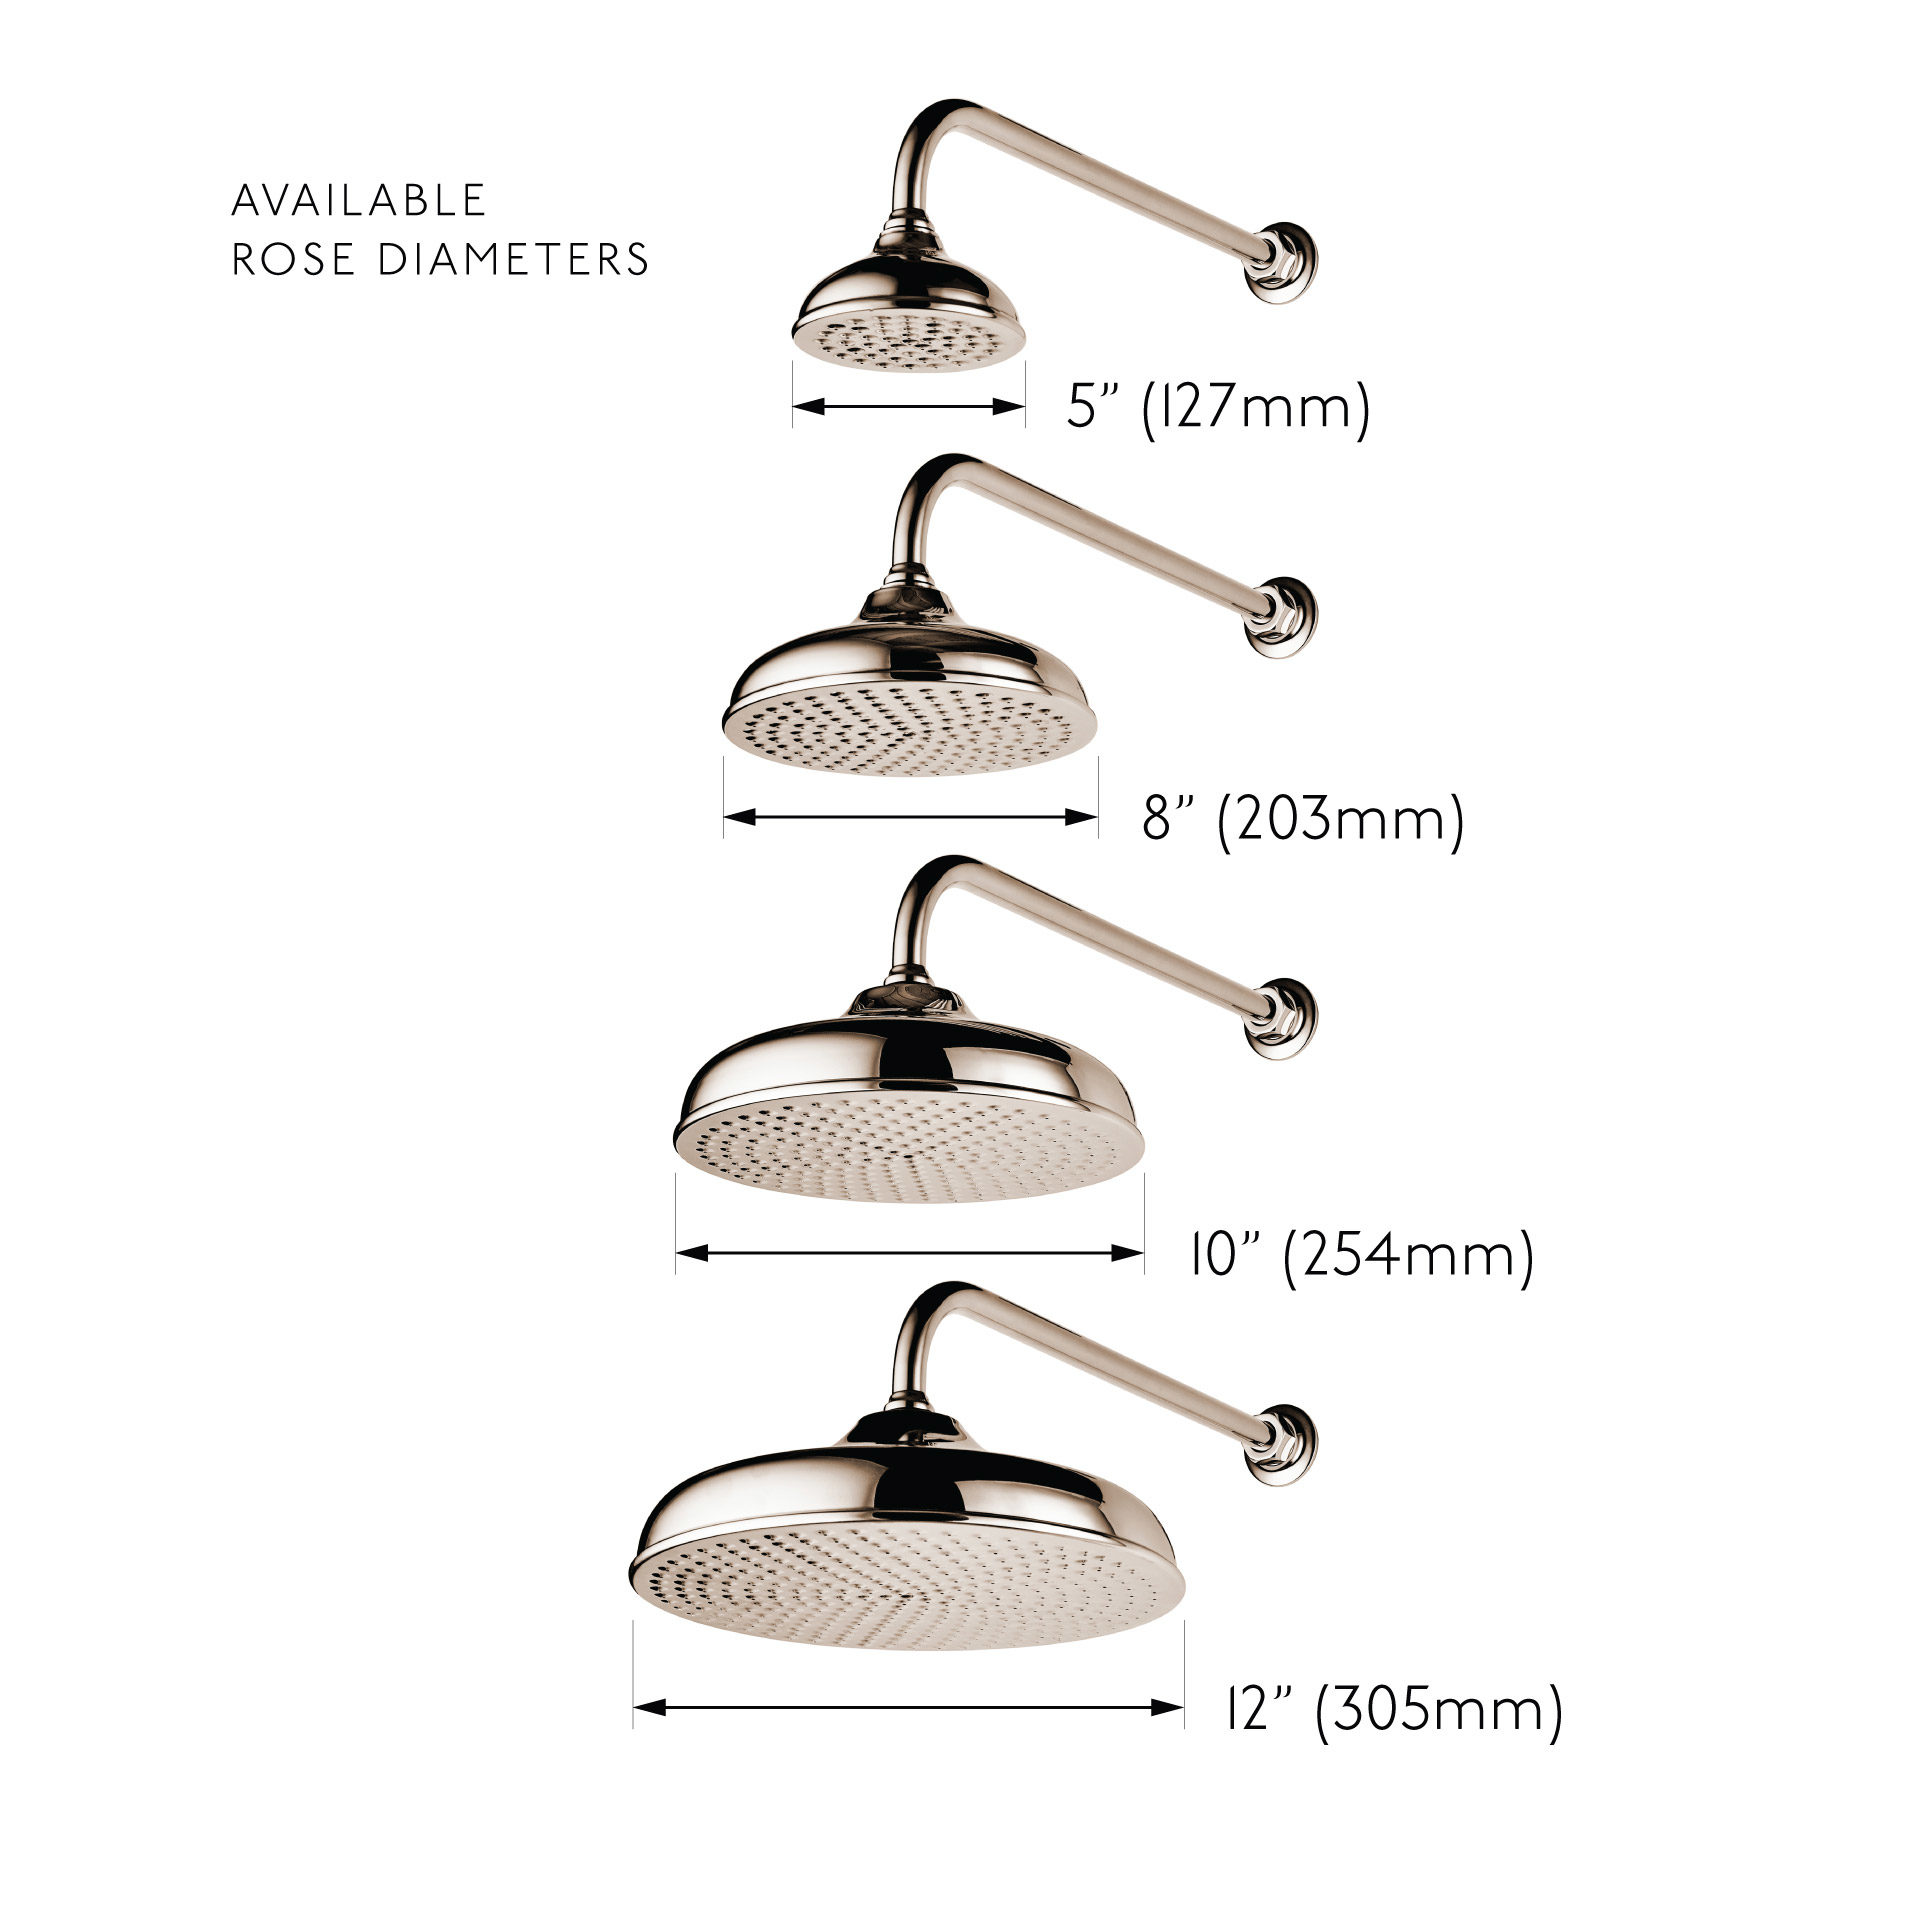 Barber Wilsons shower head size options: 5 inch (127mm), 8 inch (203mm), 10 inch (254mm), 12 inch (305mm)